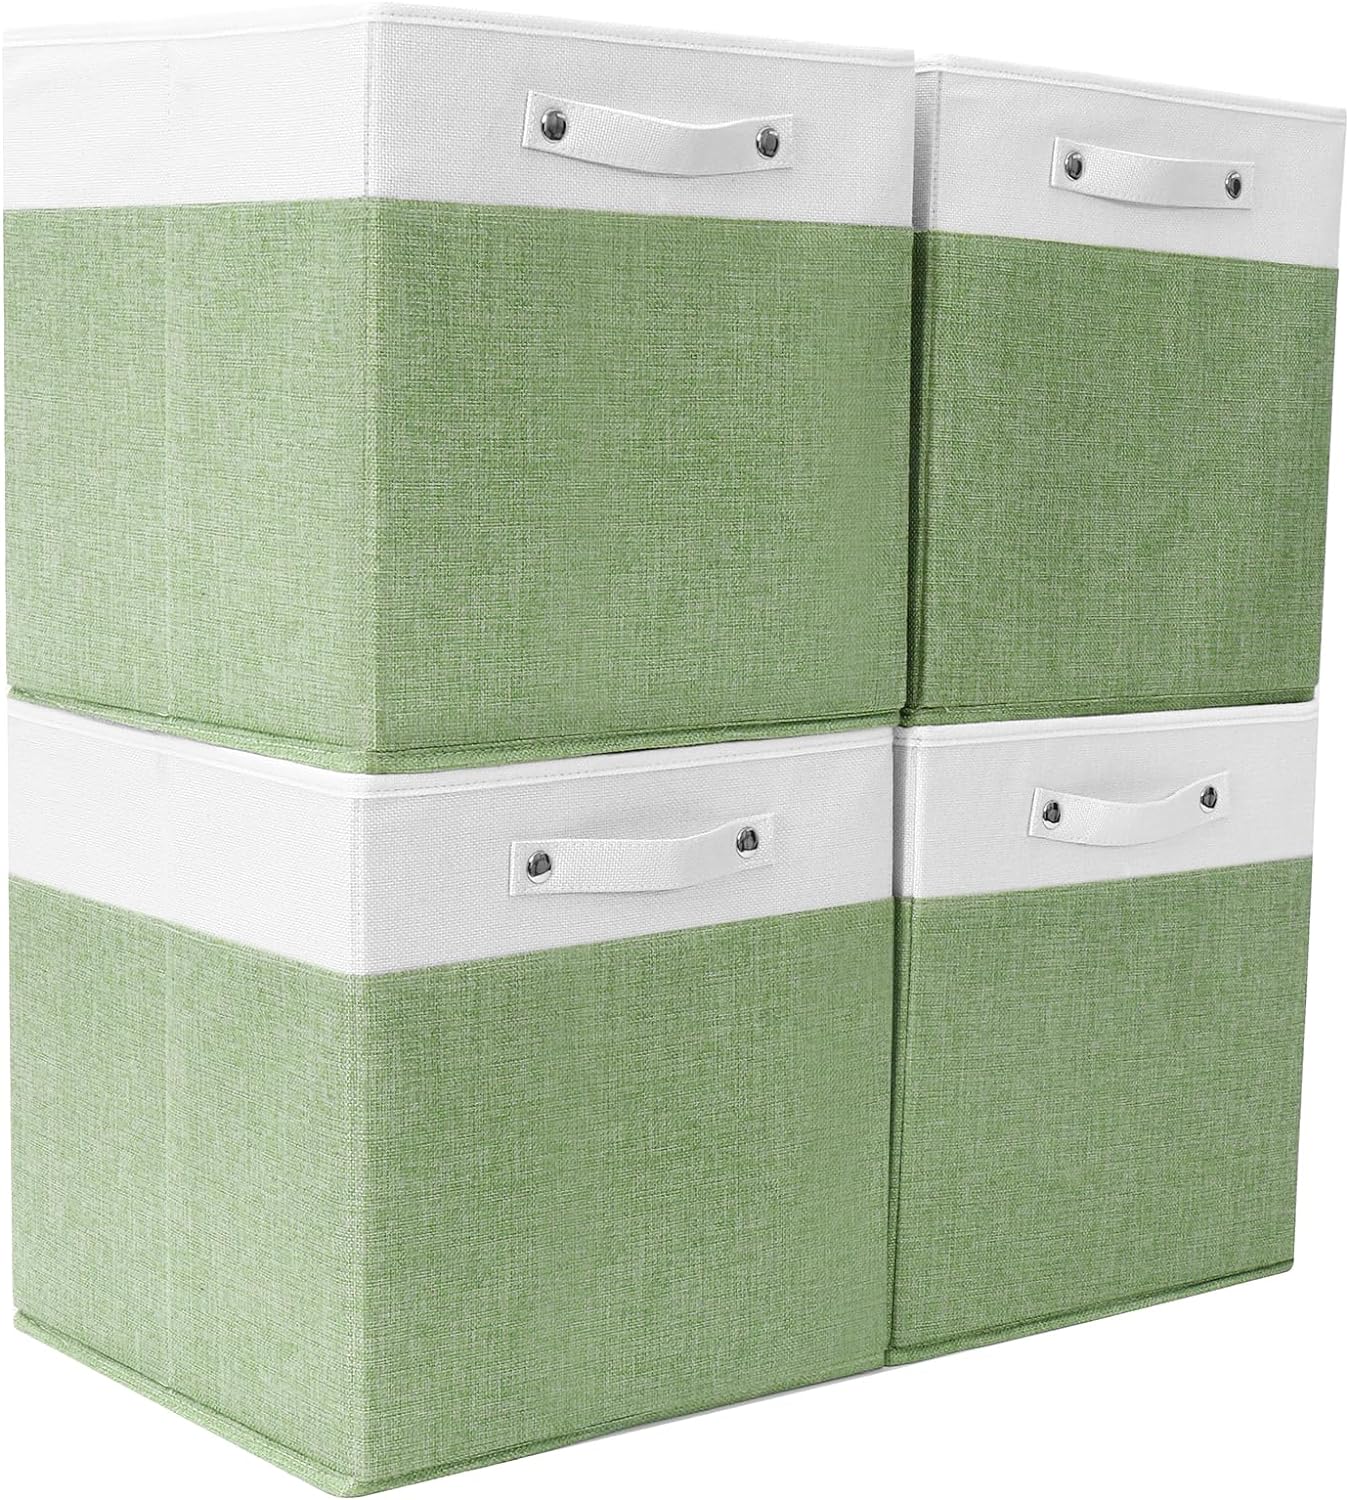 Large Foldable Cube Storage Bins, 13x13x13 Inch With Handles Coarse Linen Fabric Storage Box, Basket For Organizing Shelves, Home Cabinets and Office, 4 Packs (White and Green)